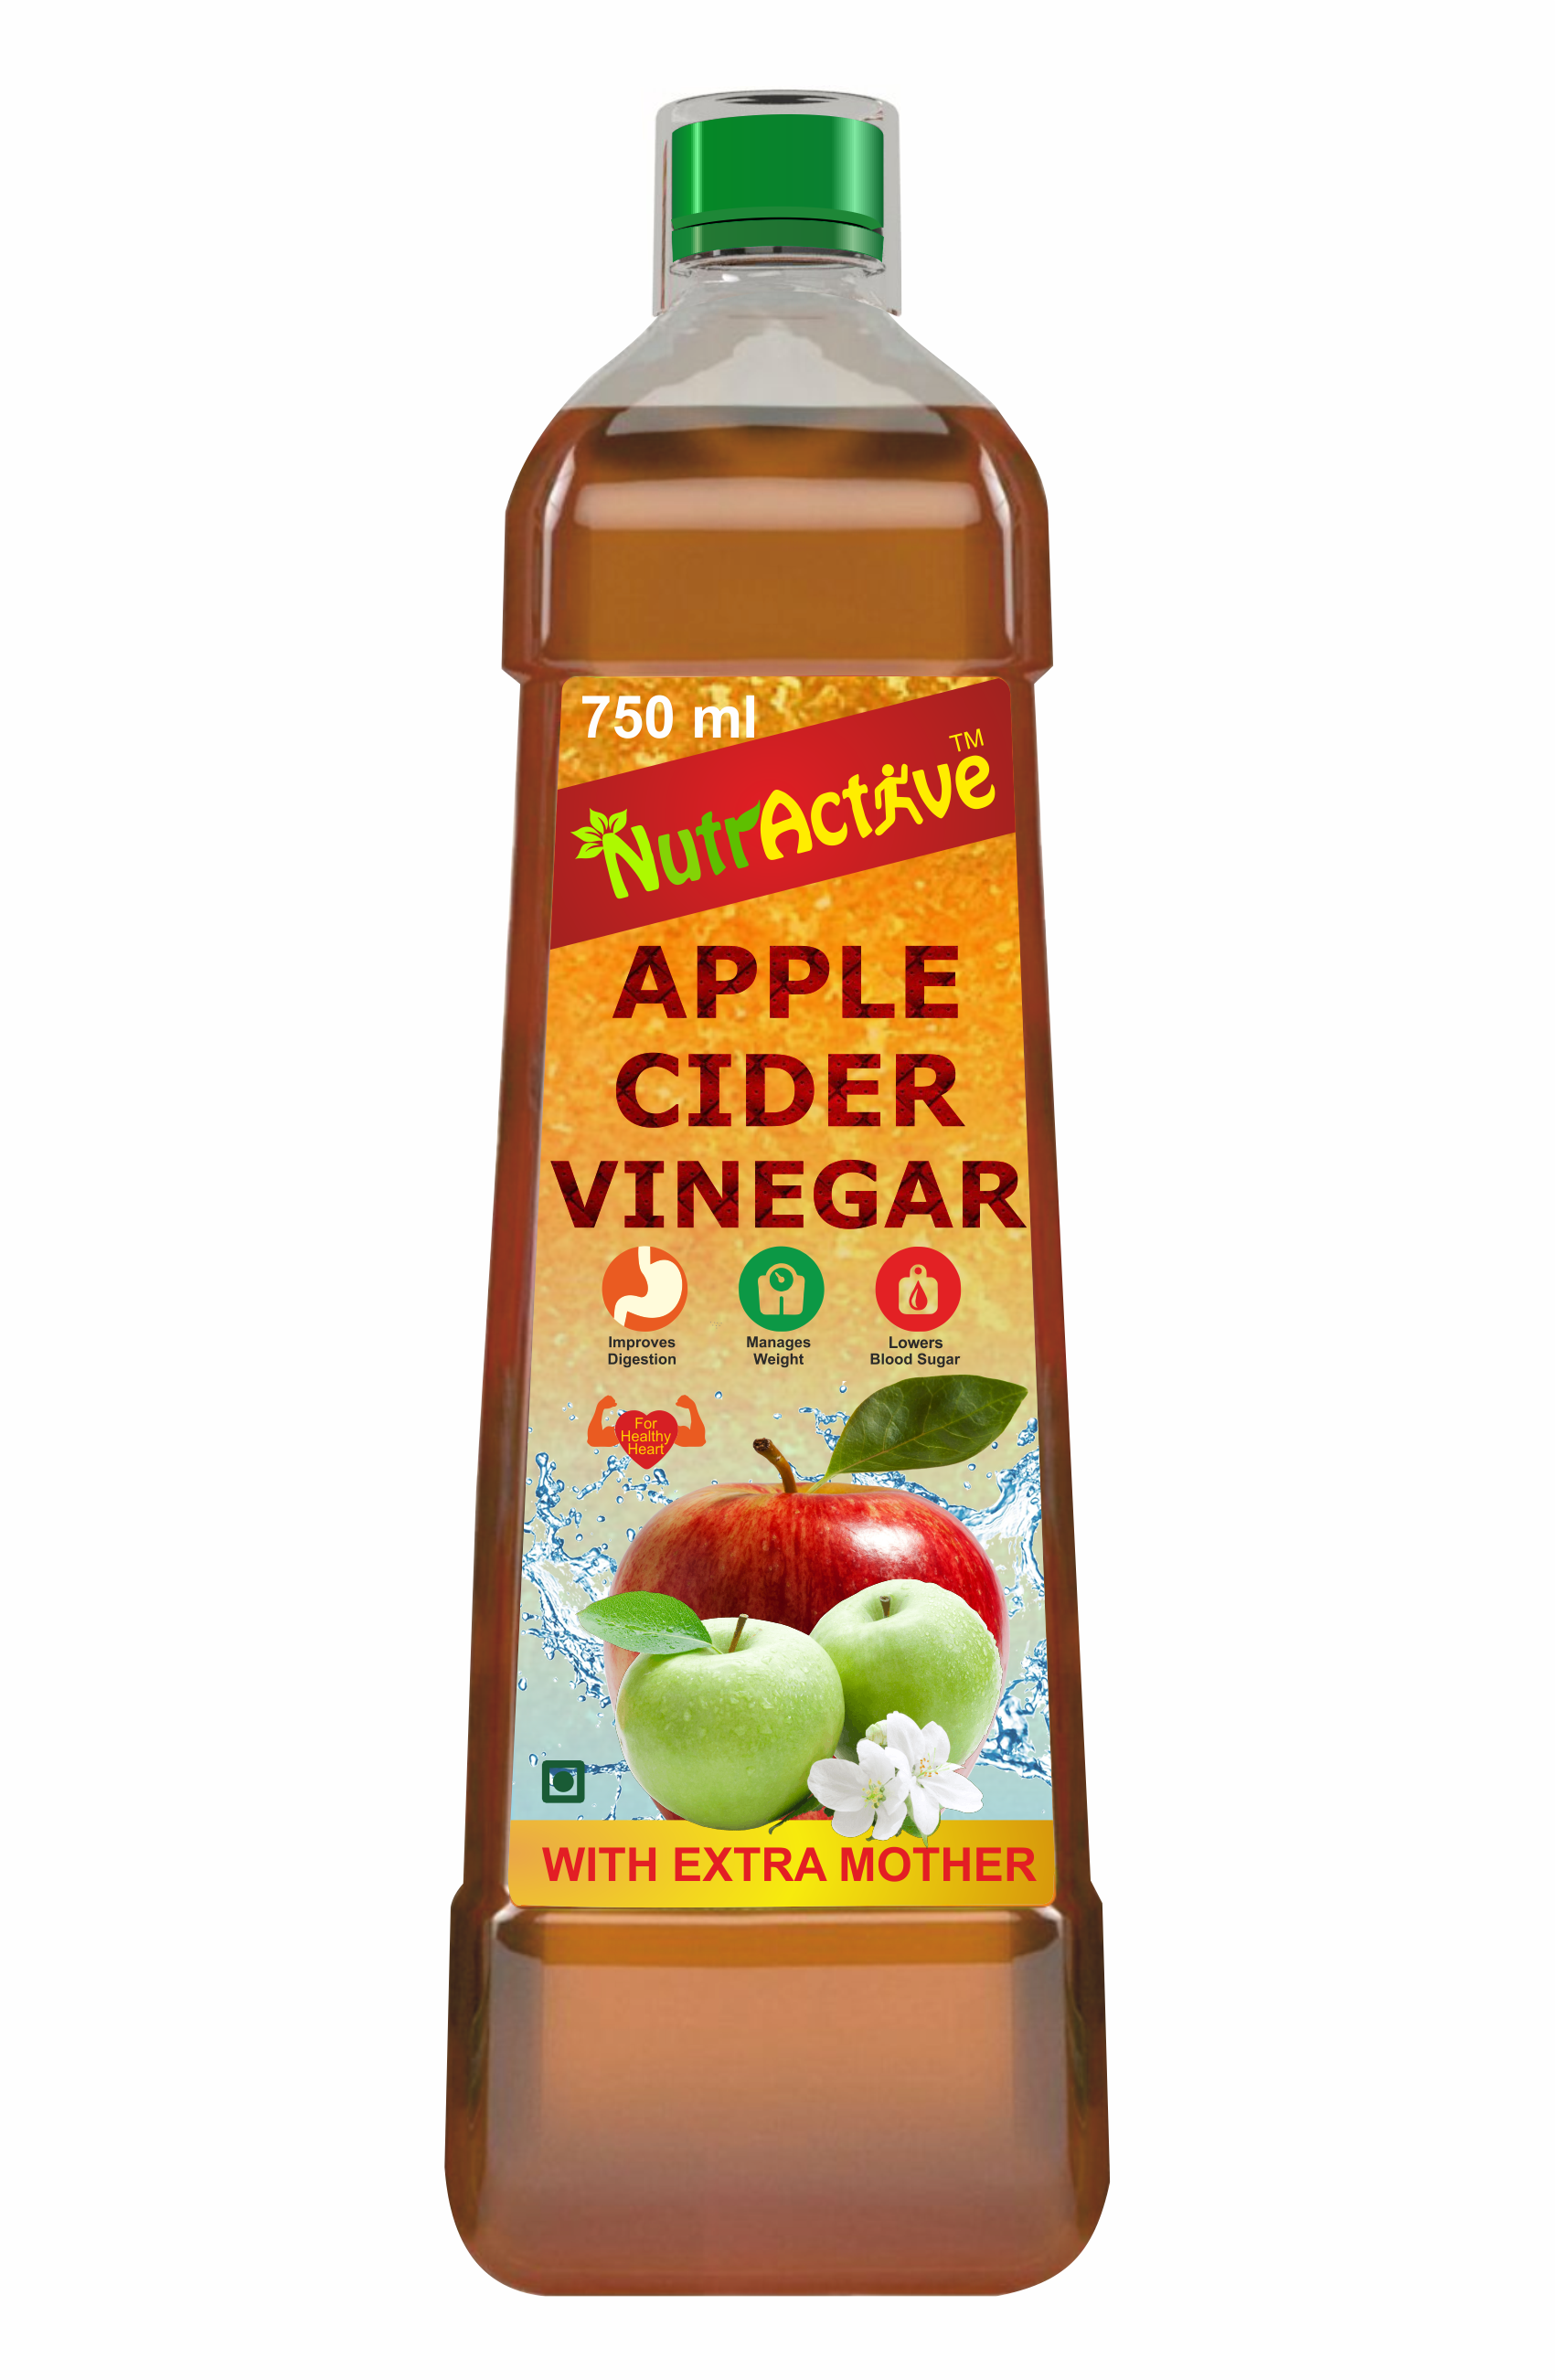     			NutrActive Apple Cider Vinegar with mother for weight loss 750 ml Fat Burner Syrup